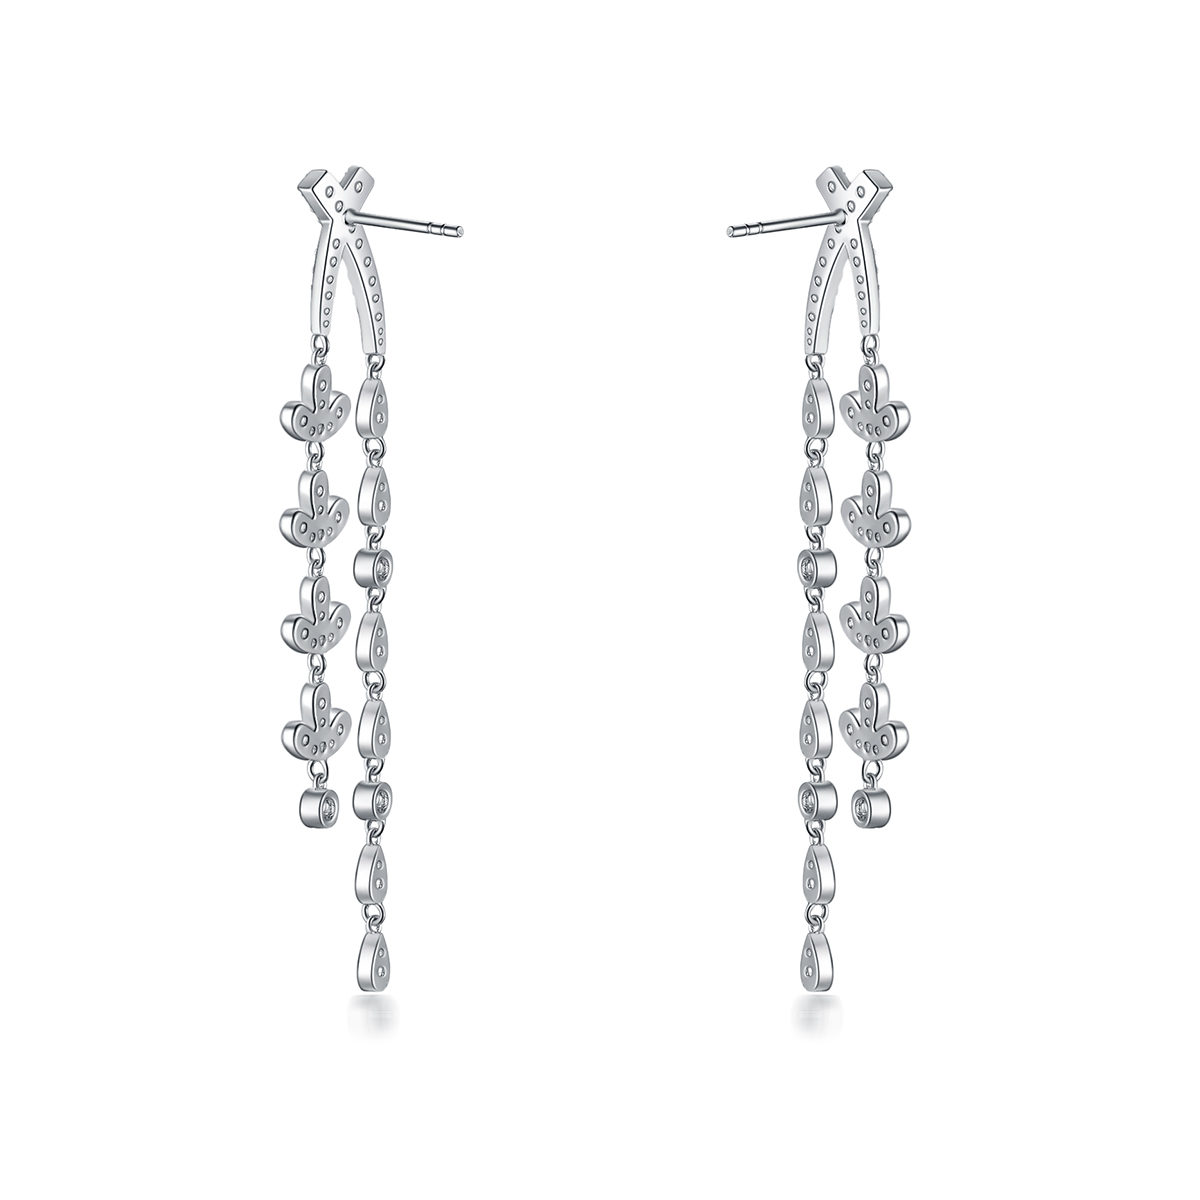 S925 sterling silver lavender series with zircon earrings long length suitable for daily use